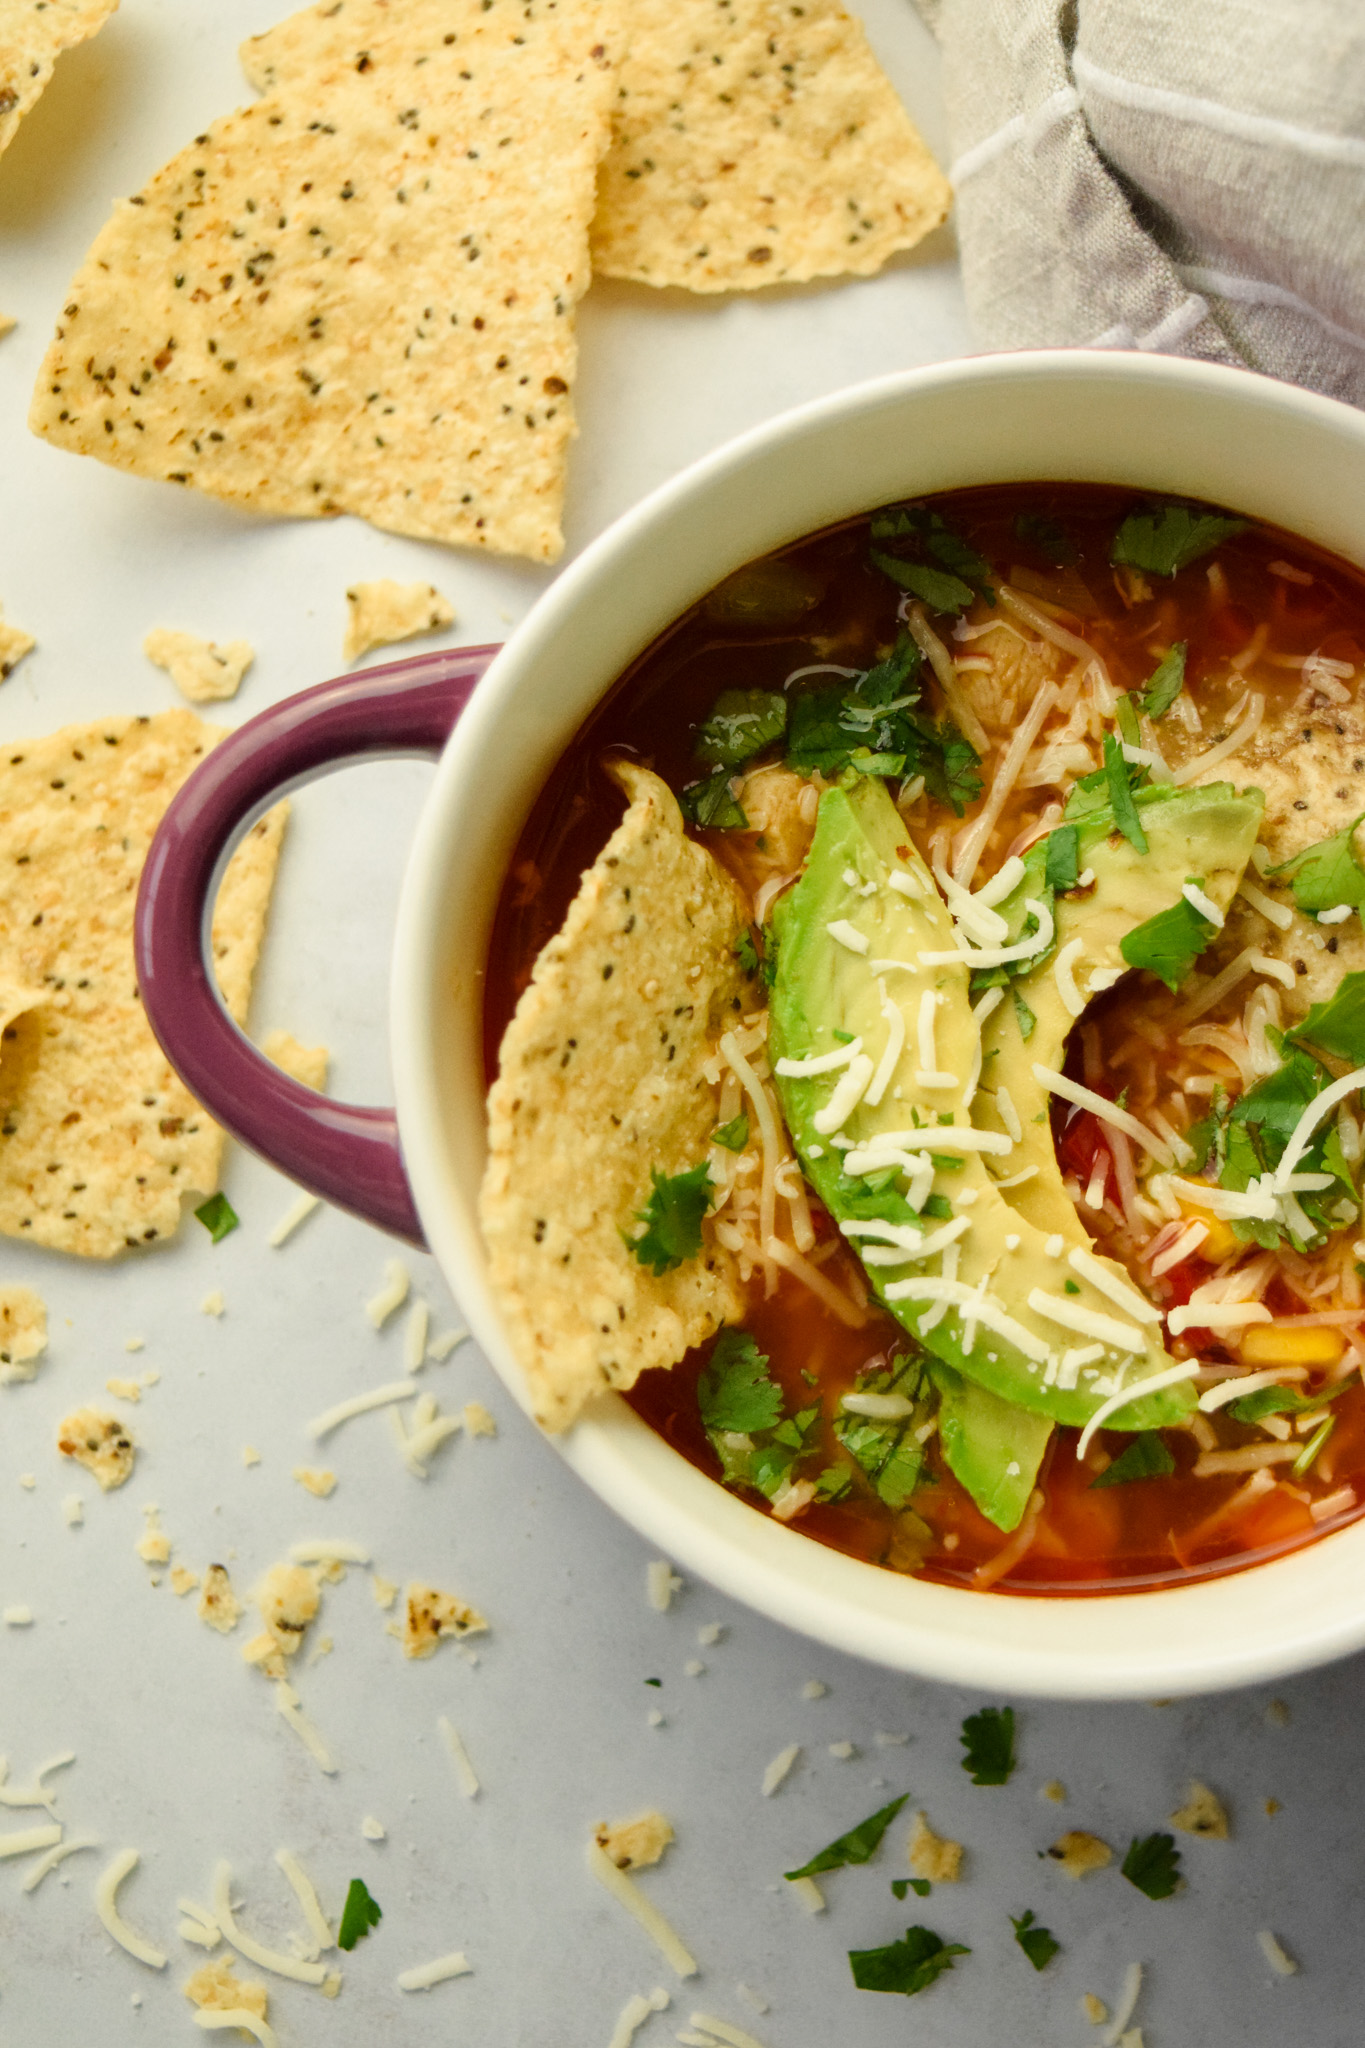 Bowl of Chicken Taco Soup with Tortilla Chips